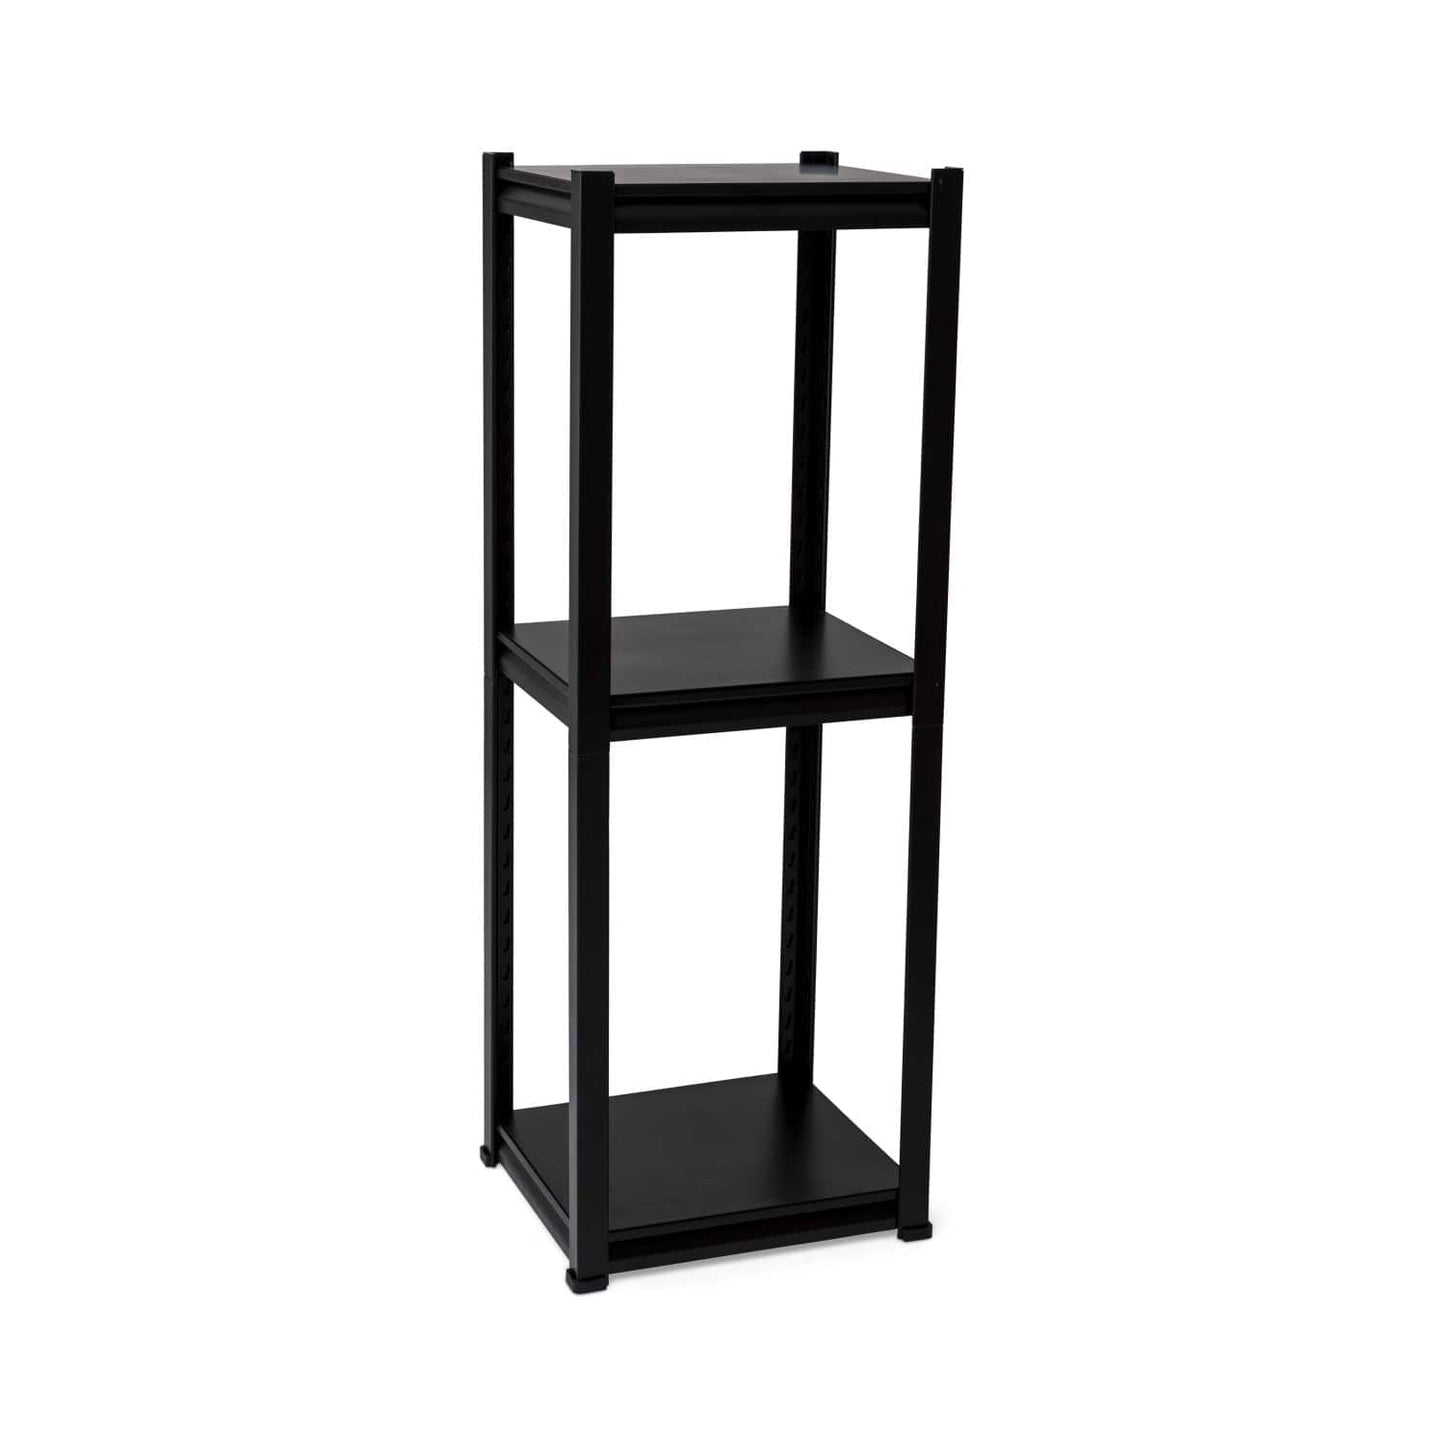 Riverstone Industries Gardening Riverstone | Maze 3 Tier Shelving System for Maze Worm Farms RSI-MC3TS